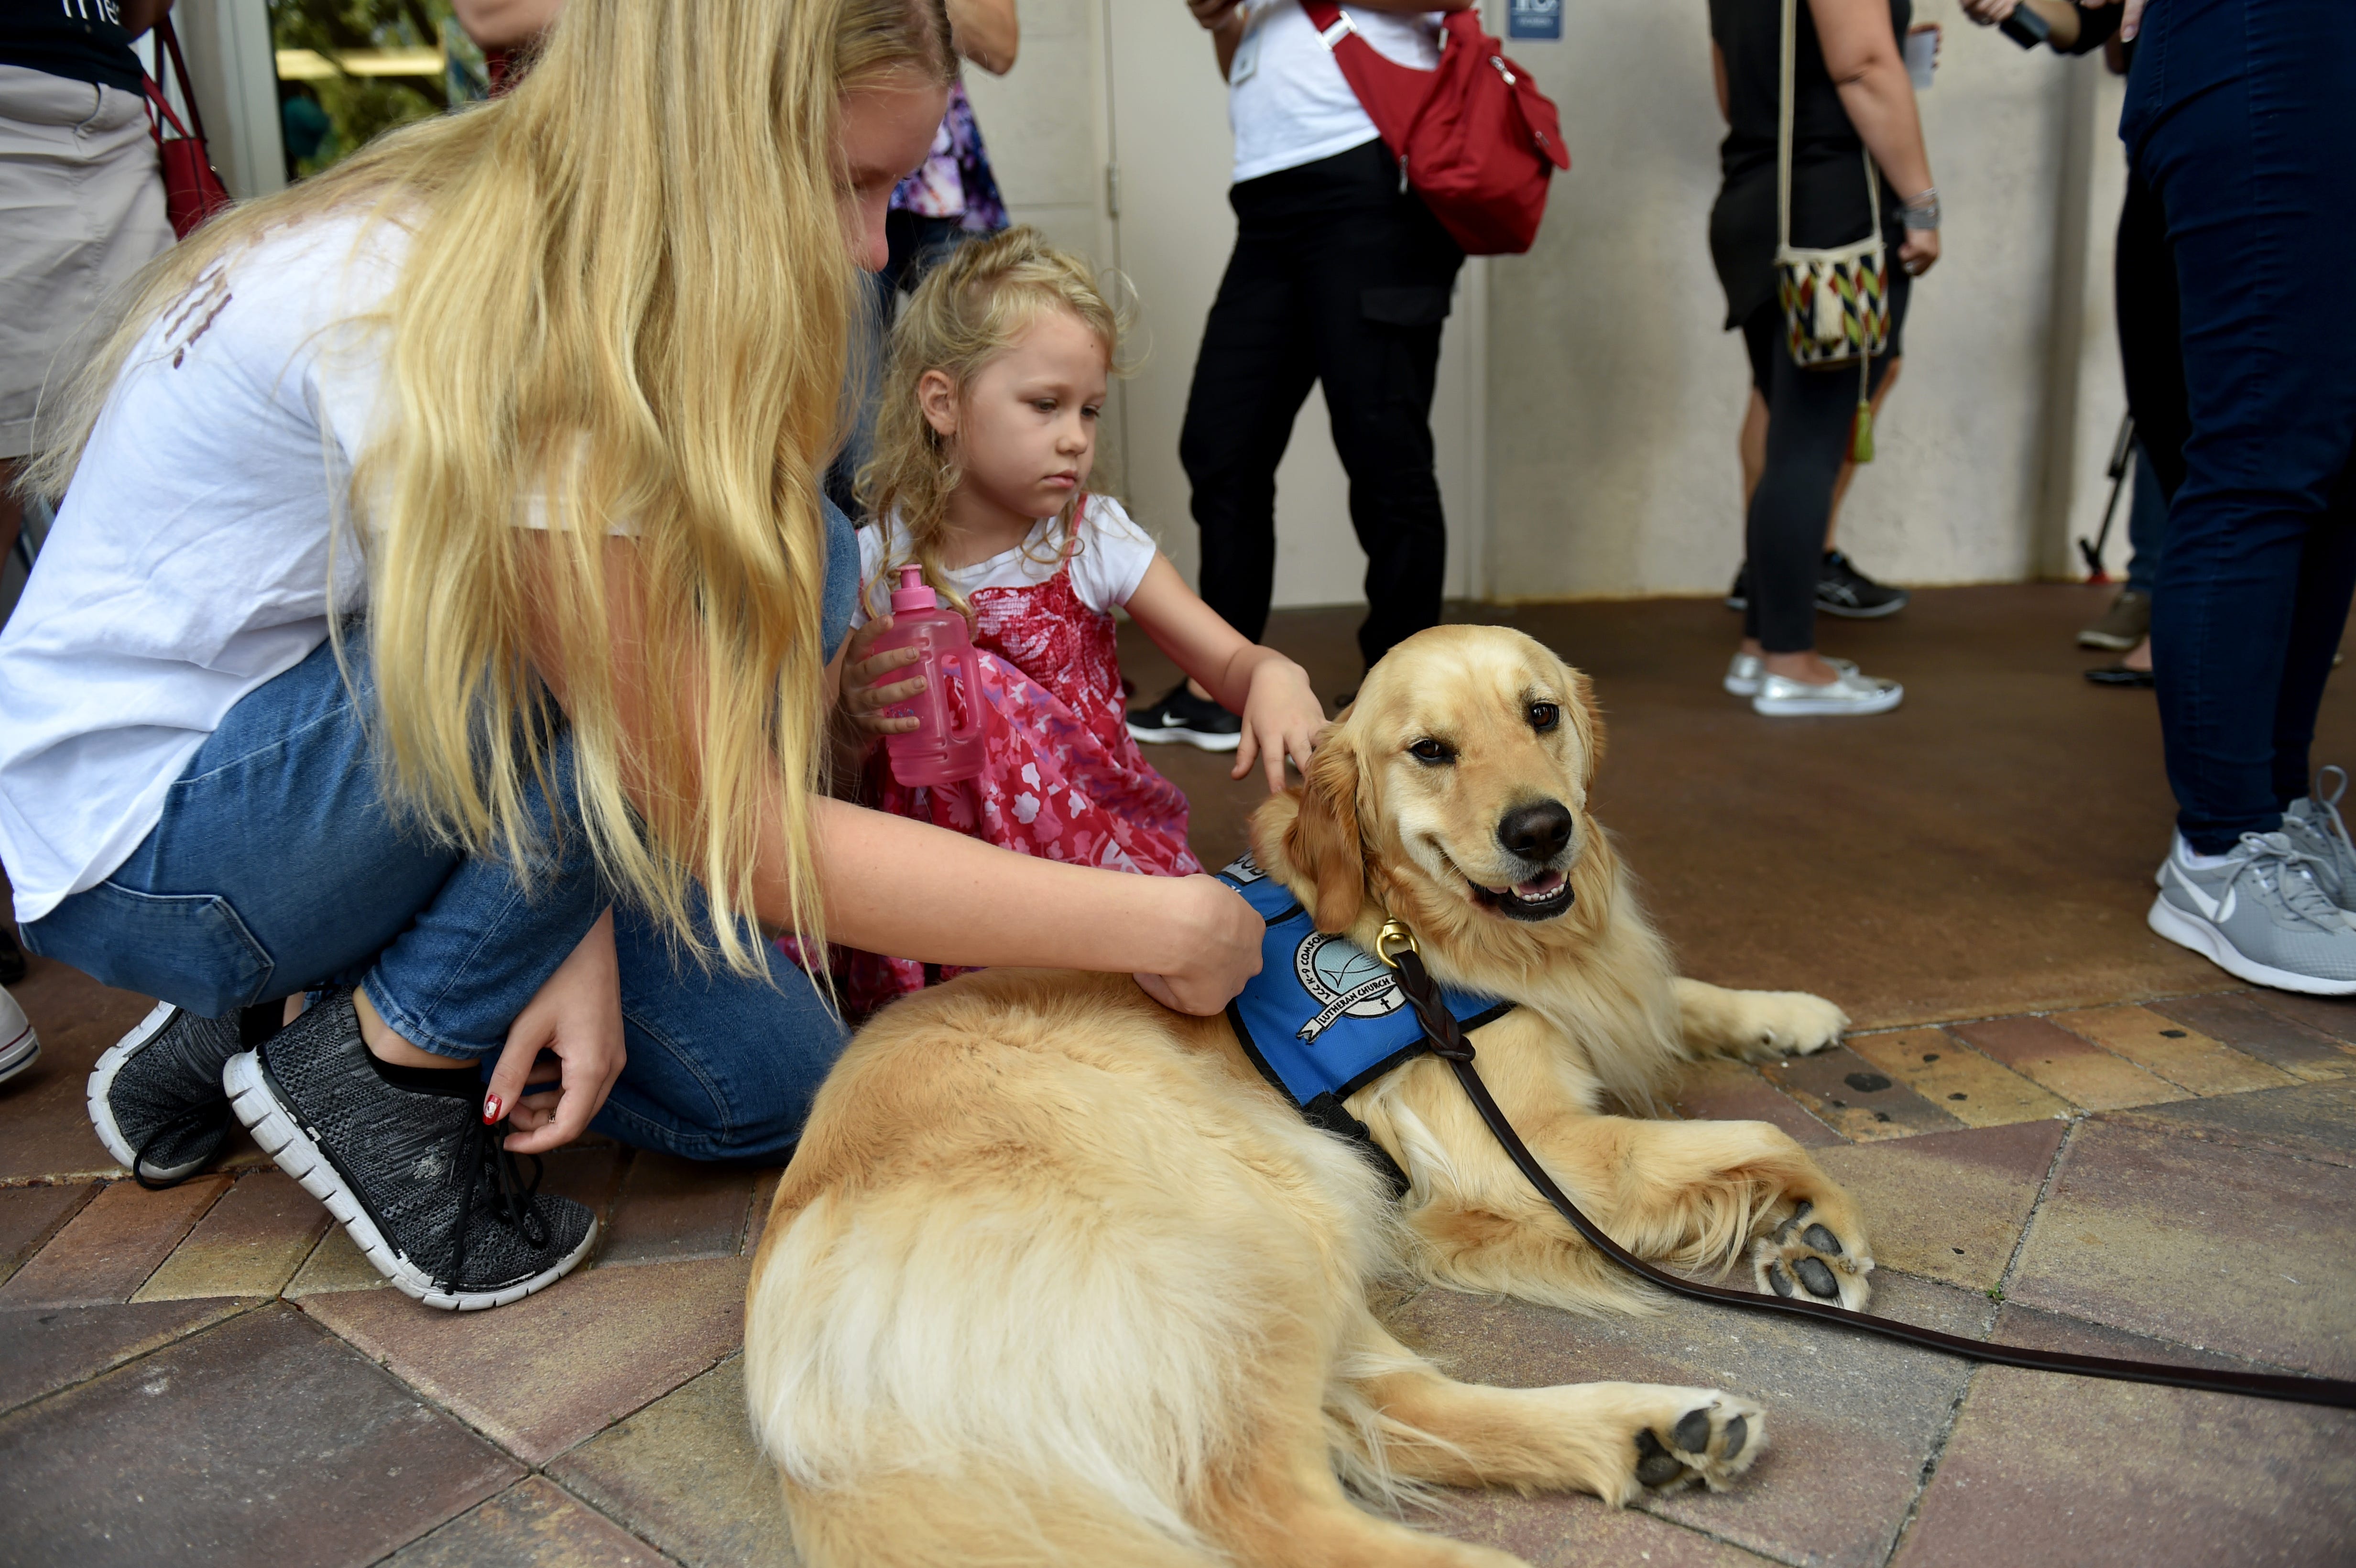 Florida school shooting: Comfort dogs offer support to grieving community